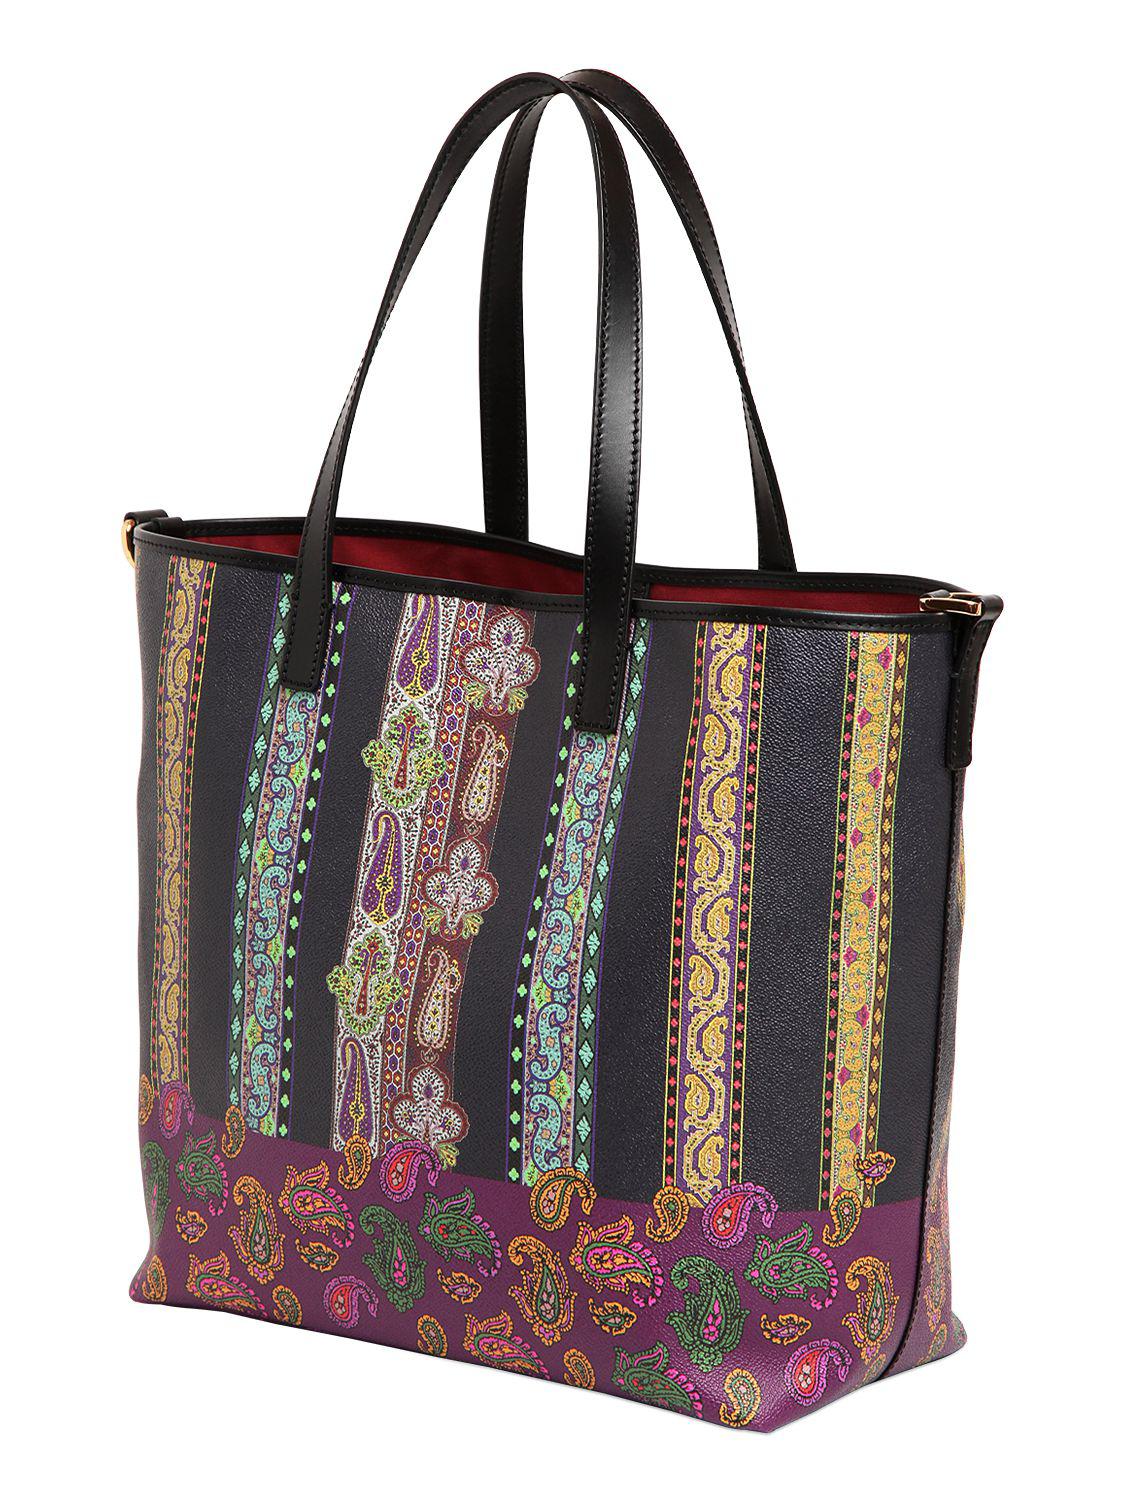 Etro Rainbow Paisley Leather Tote Bag in Black - Lyst